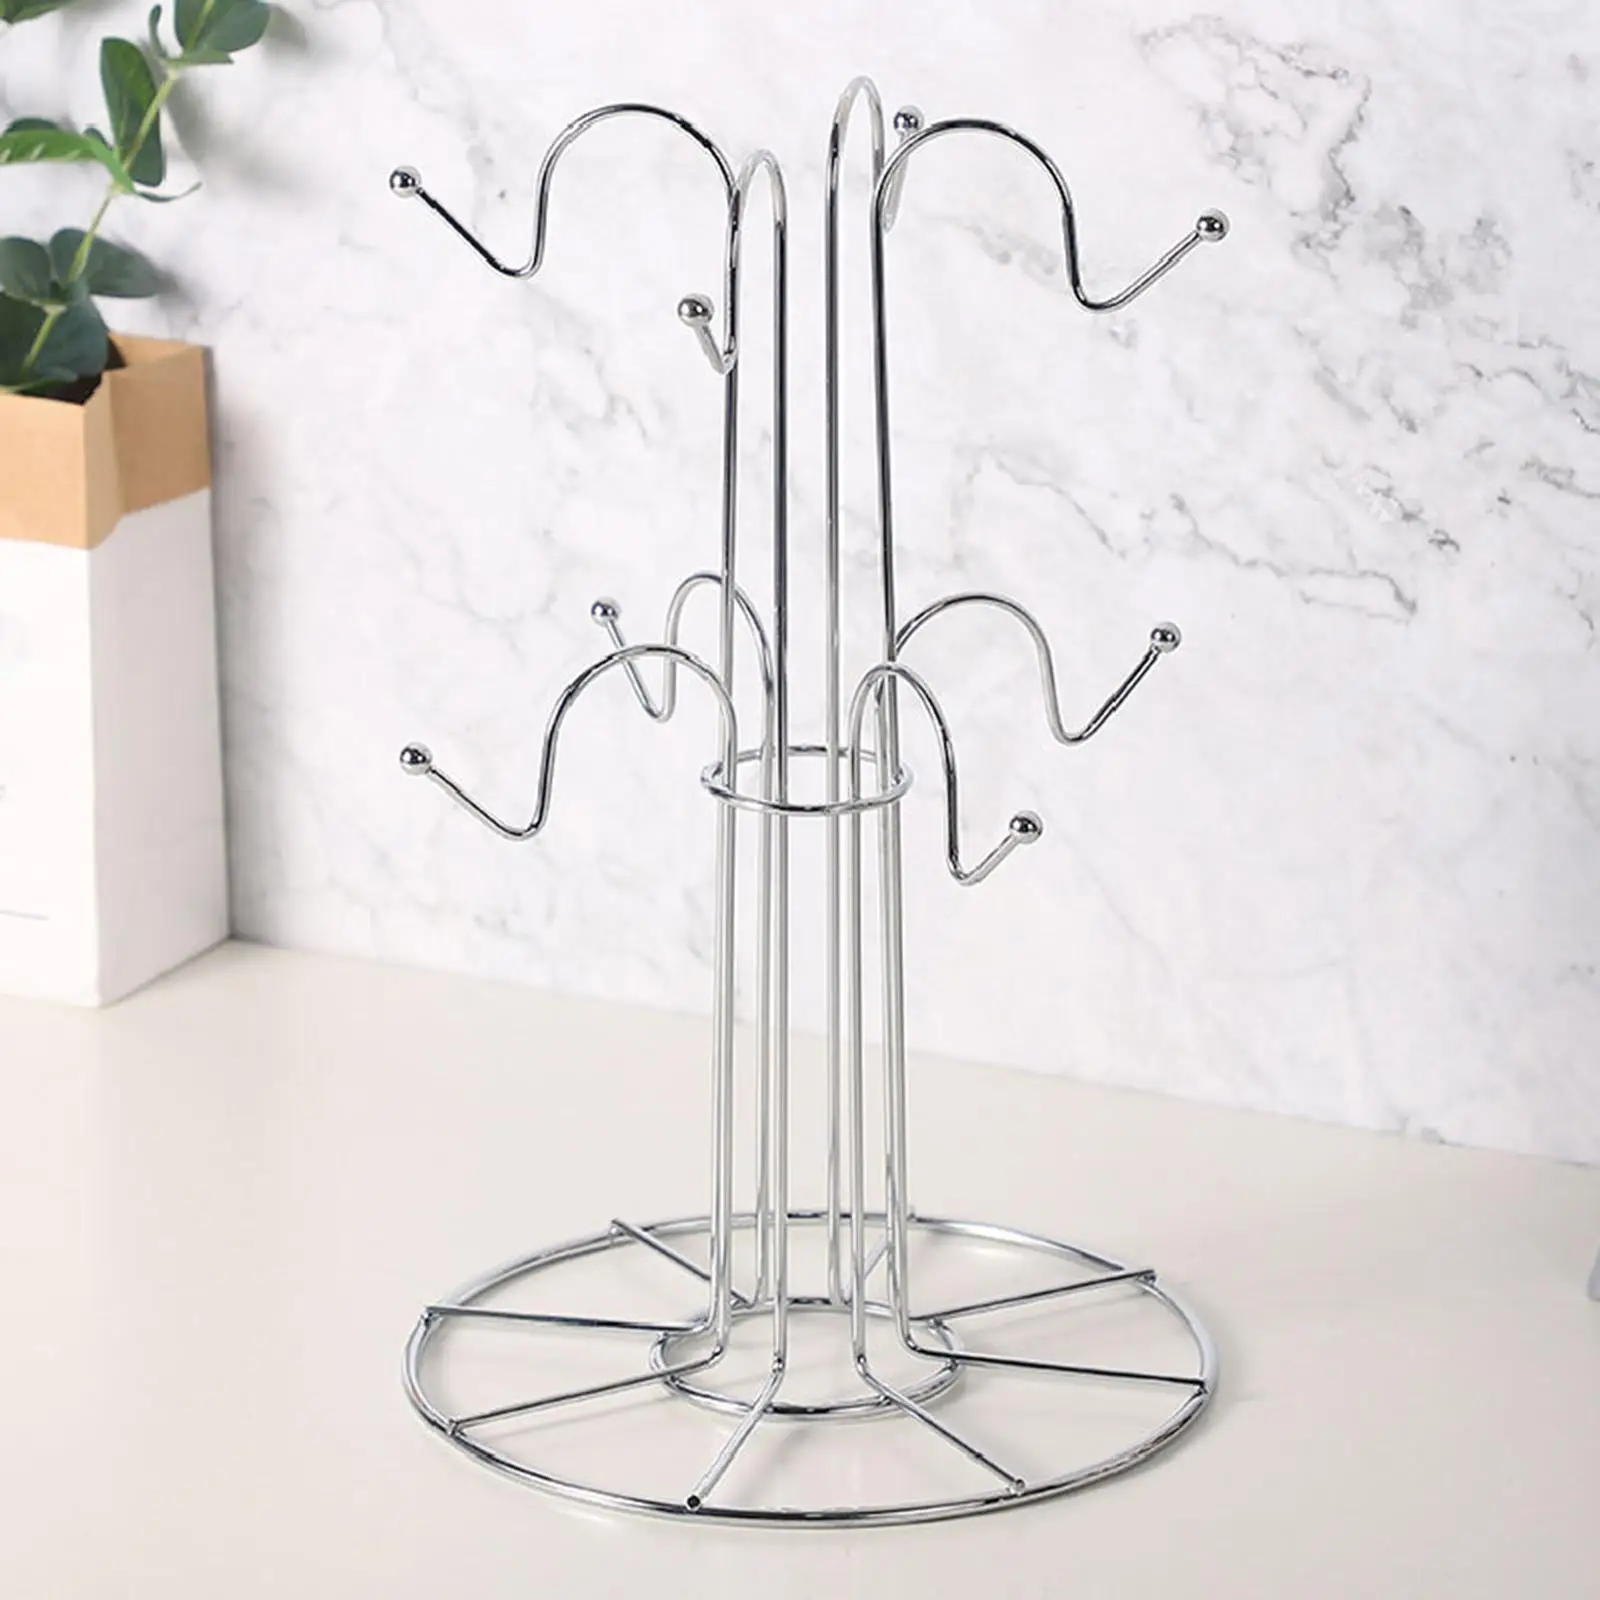 Cup Drying Rack Drainer 8 Hooks Tree Coffee Bar Decor Diversified Stand for Tabletop Home